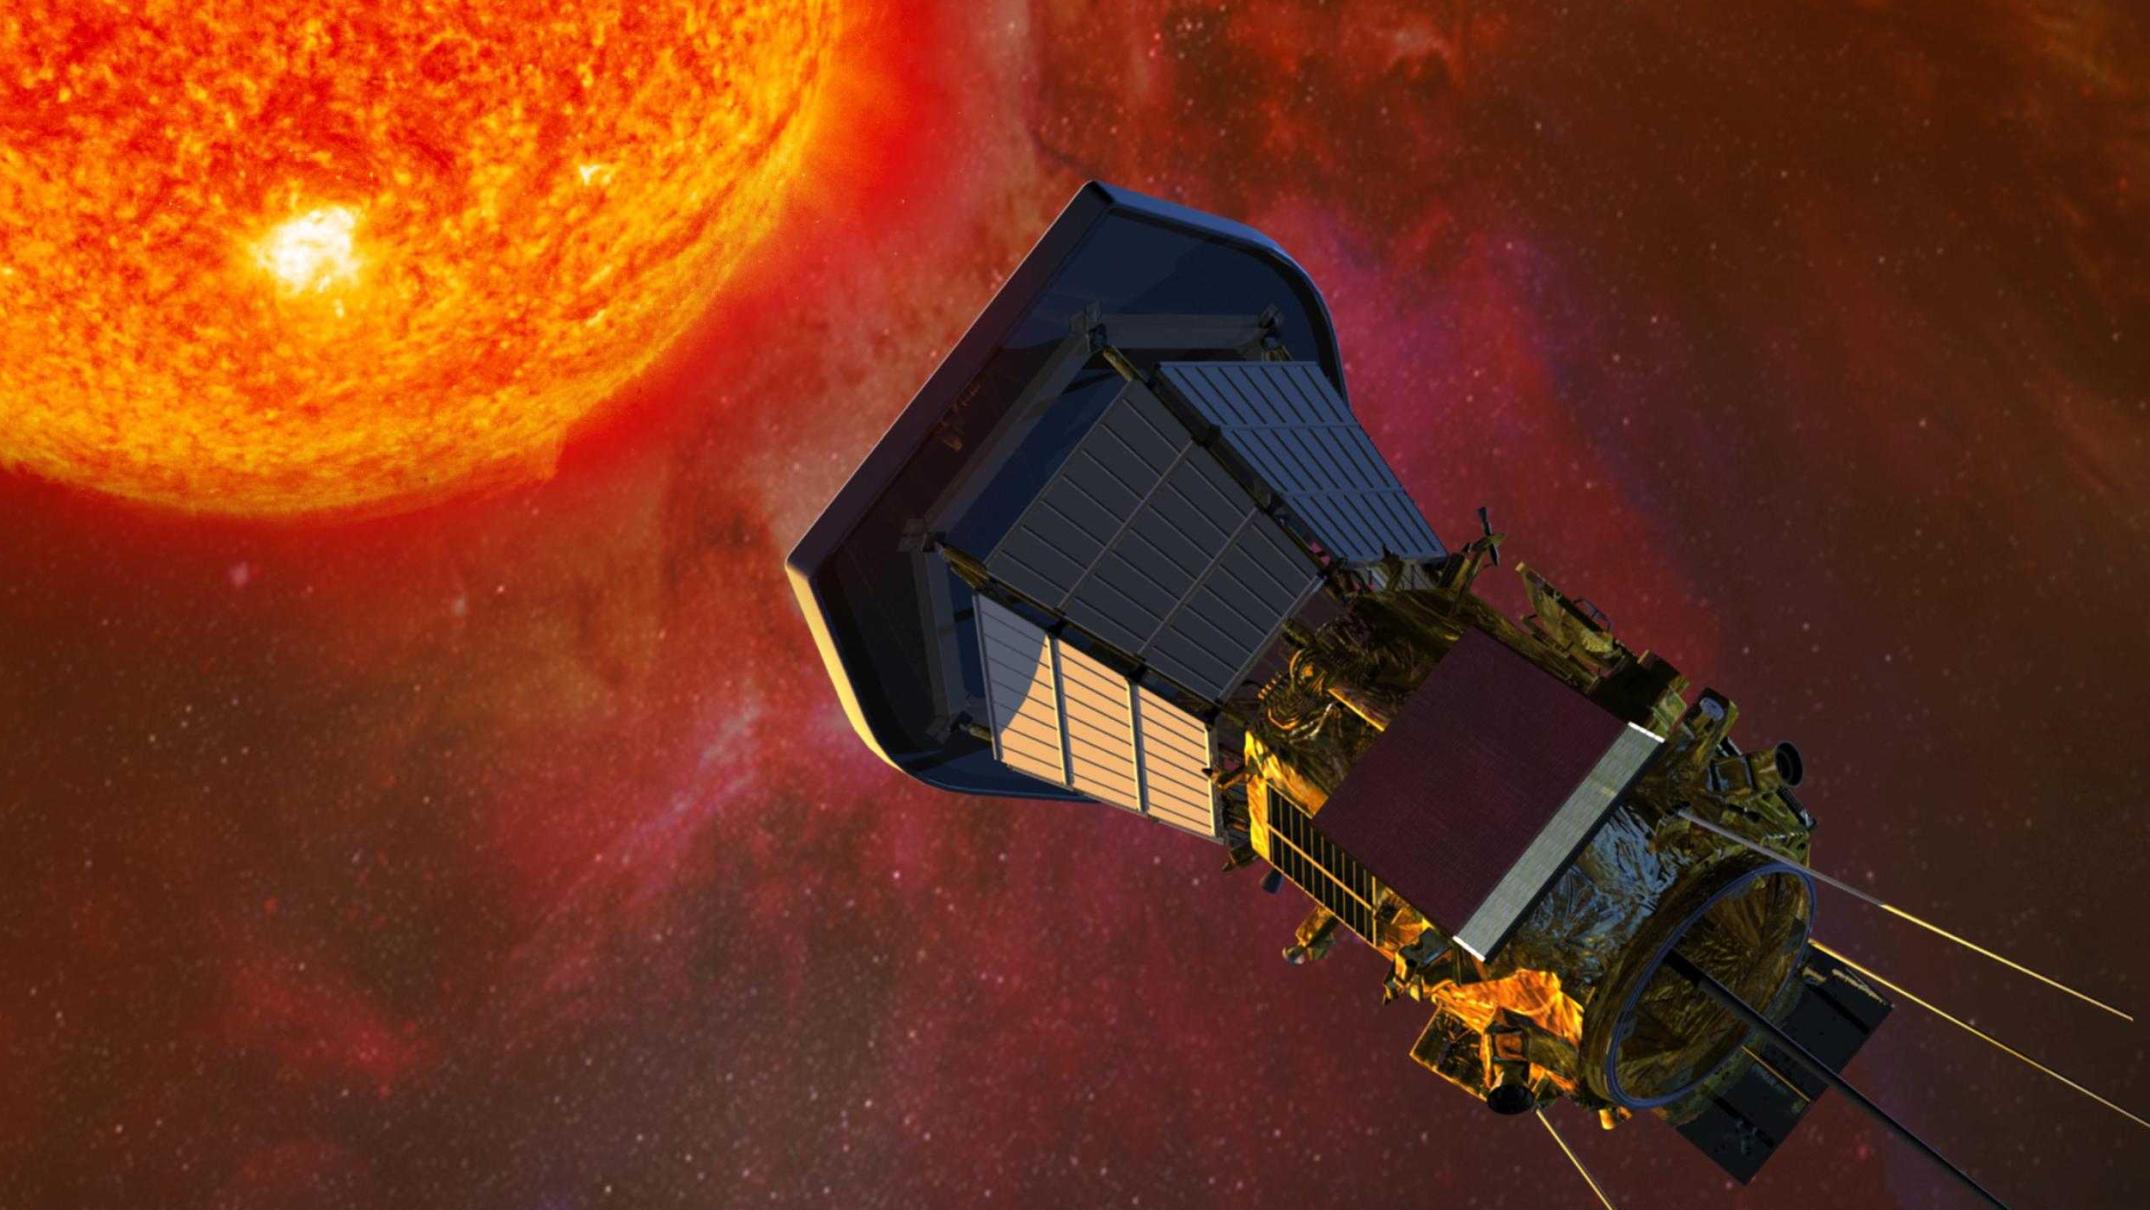 NASA's Parker Solar Probe entered the Sun's corona and astronomers shared a video from the encounter. Credit: NASA